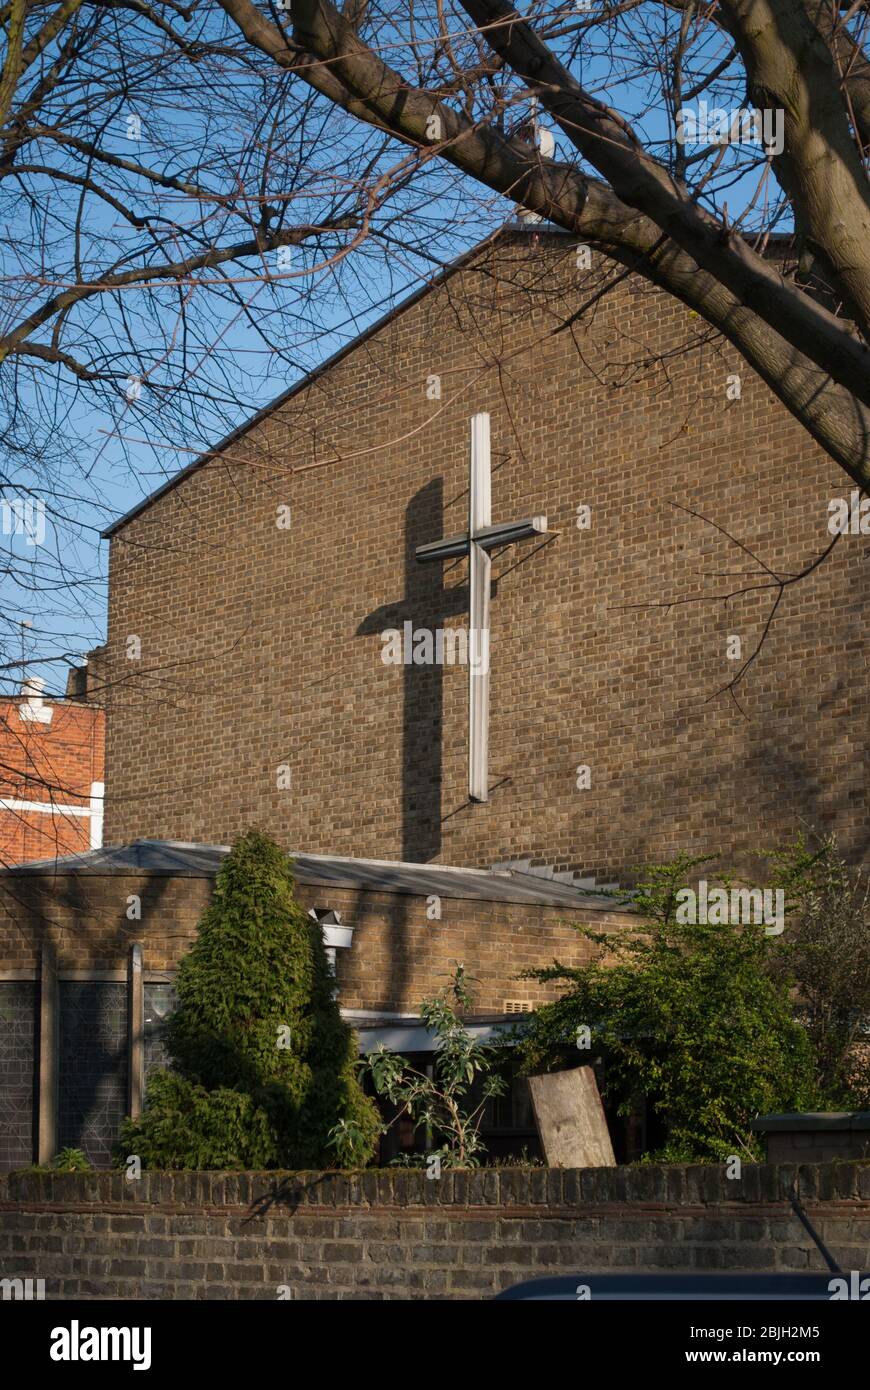 1950s Church Mid Century Architecture Brickwork Brick St Etheldreda's Church Fulham, 528 Fulham Palace Rd, Fulham, London SW6 by Guy Biscoe Stock Photo